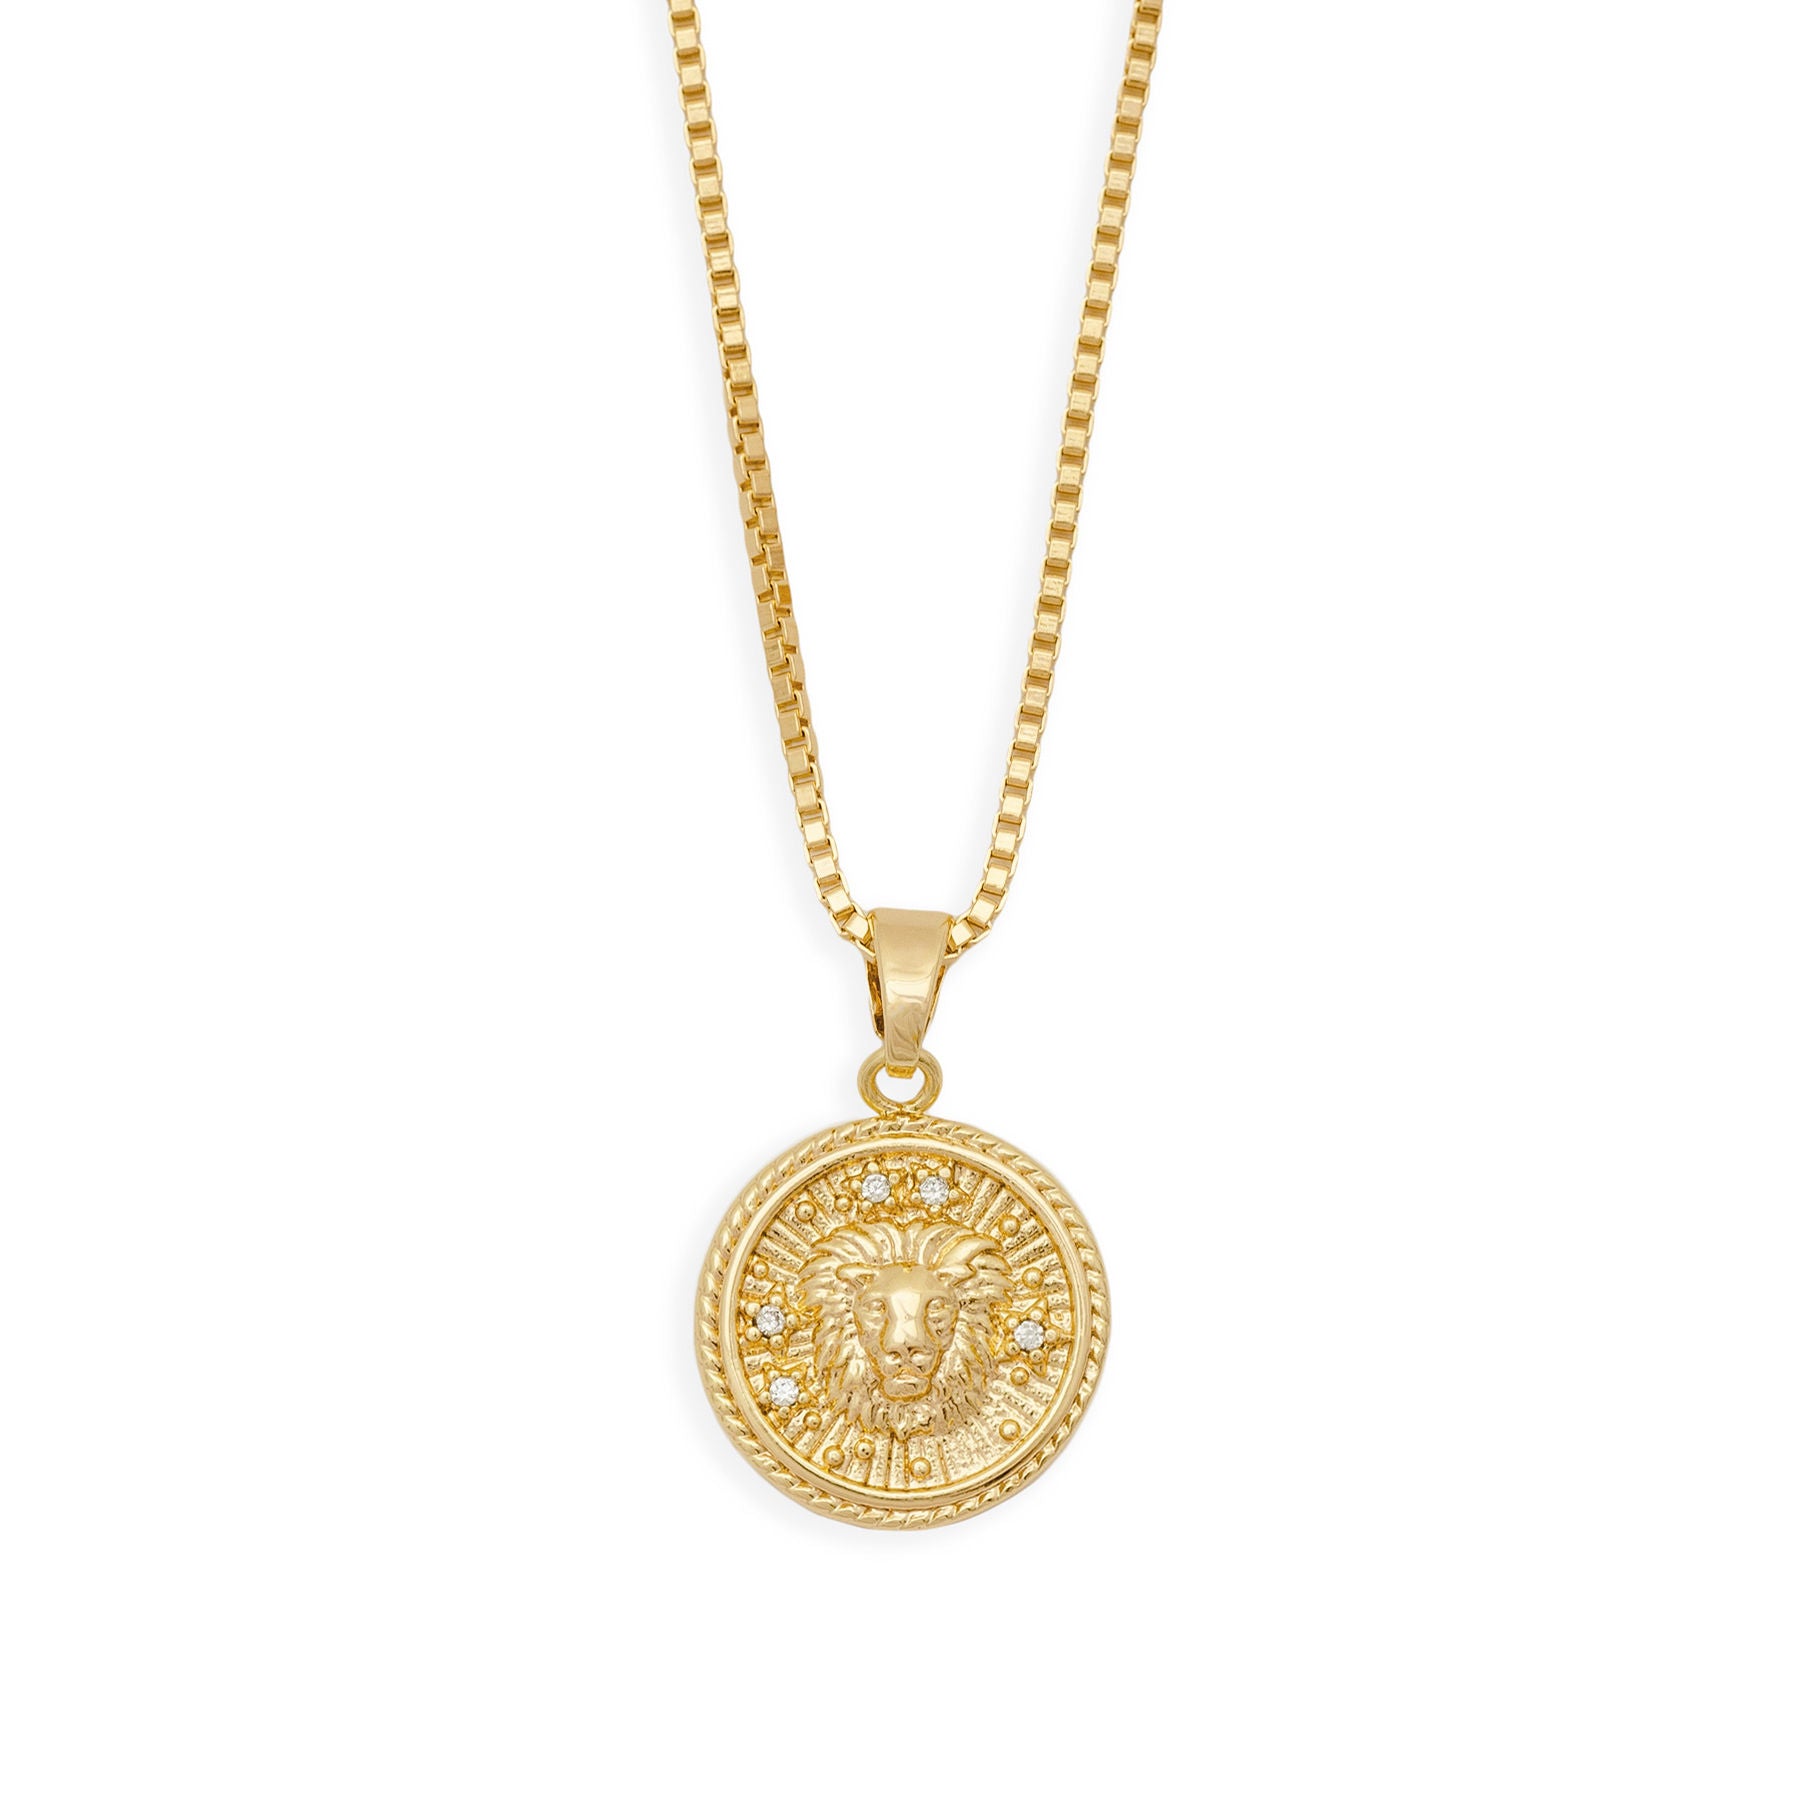 In the Stars Zodiac Necklace - Leo from Erin Fader Jewelry